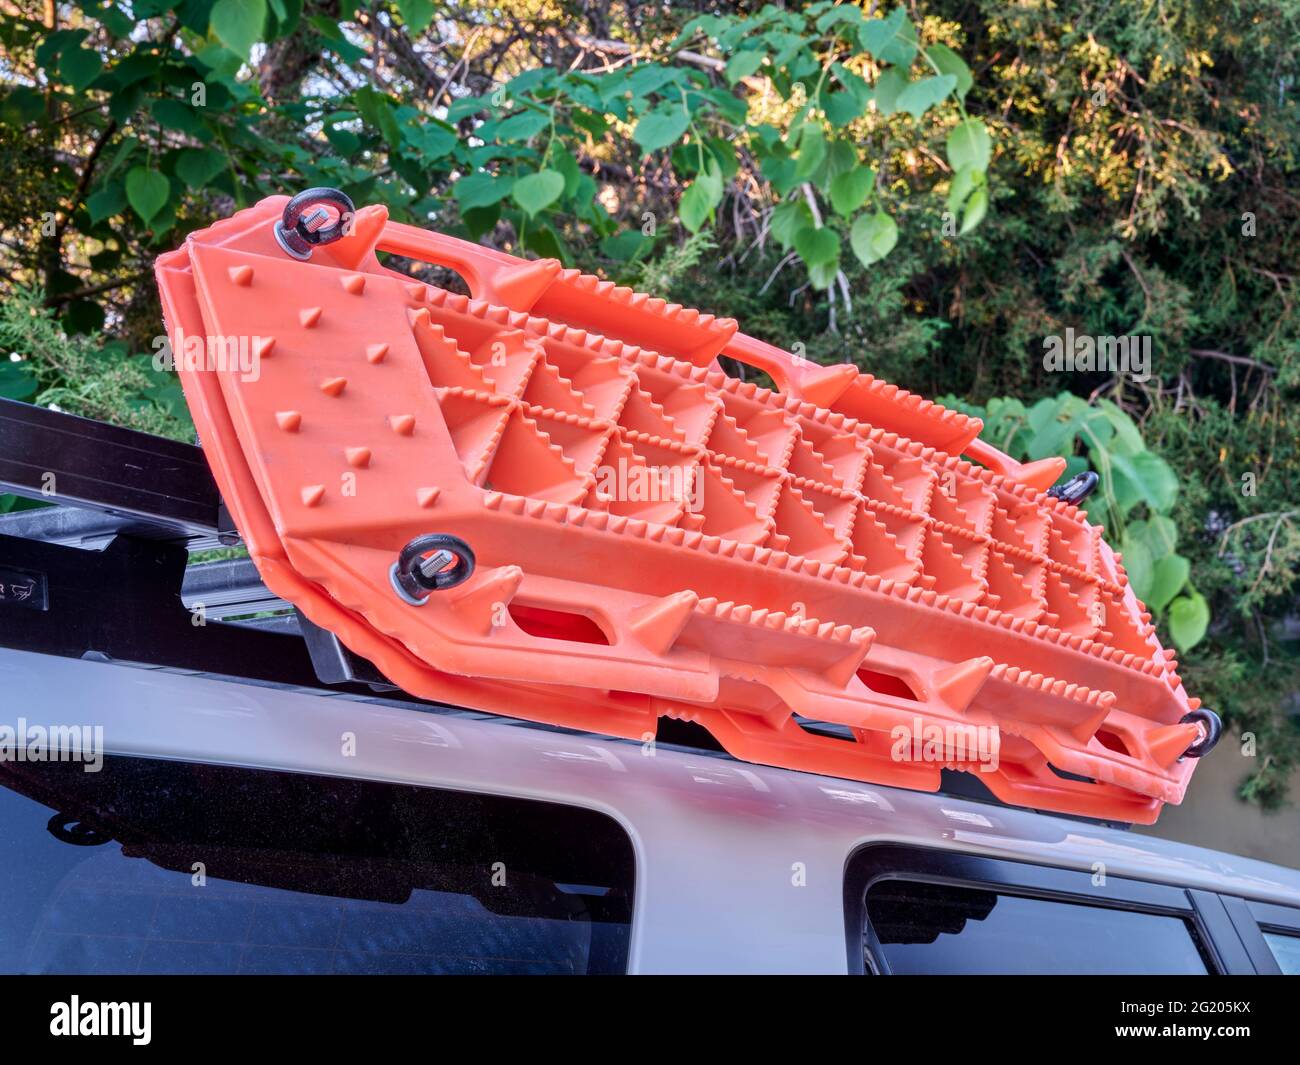 recovery traction ladders mounted on roof racks of suv, used to enhance tire traction in mud, snow or sand emergency conditions Stock Photo